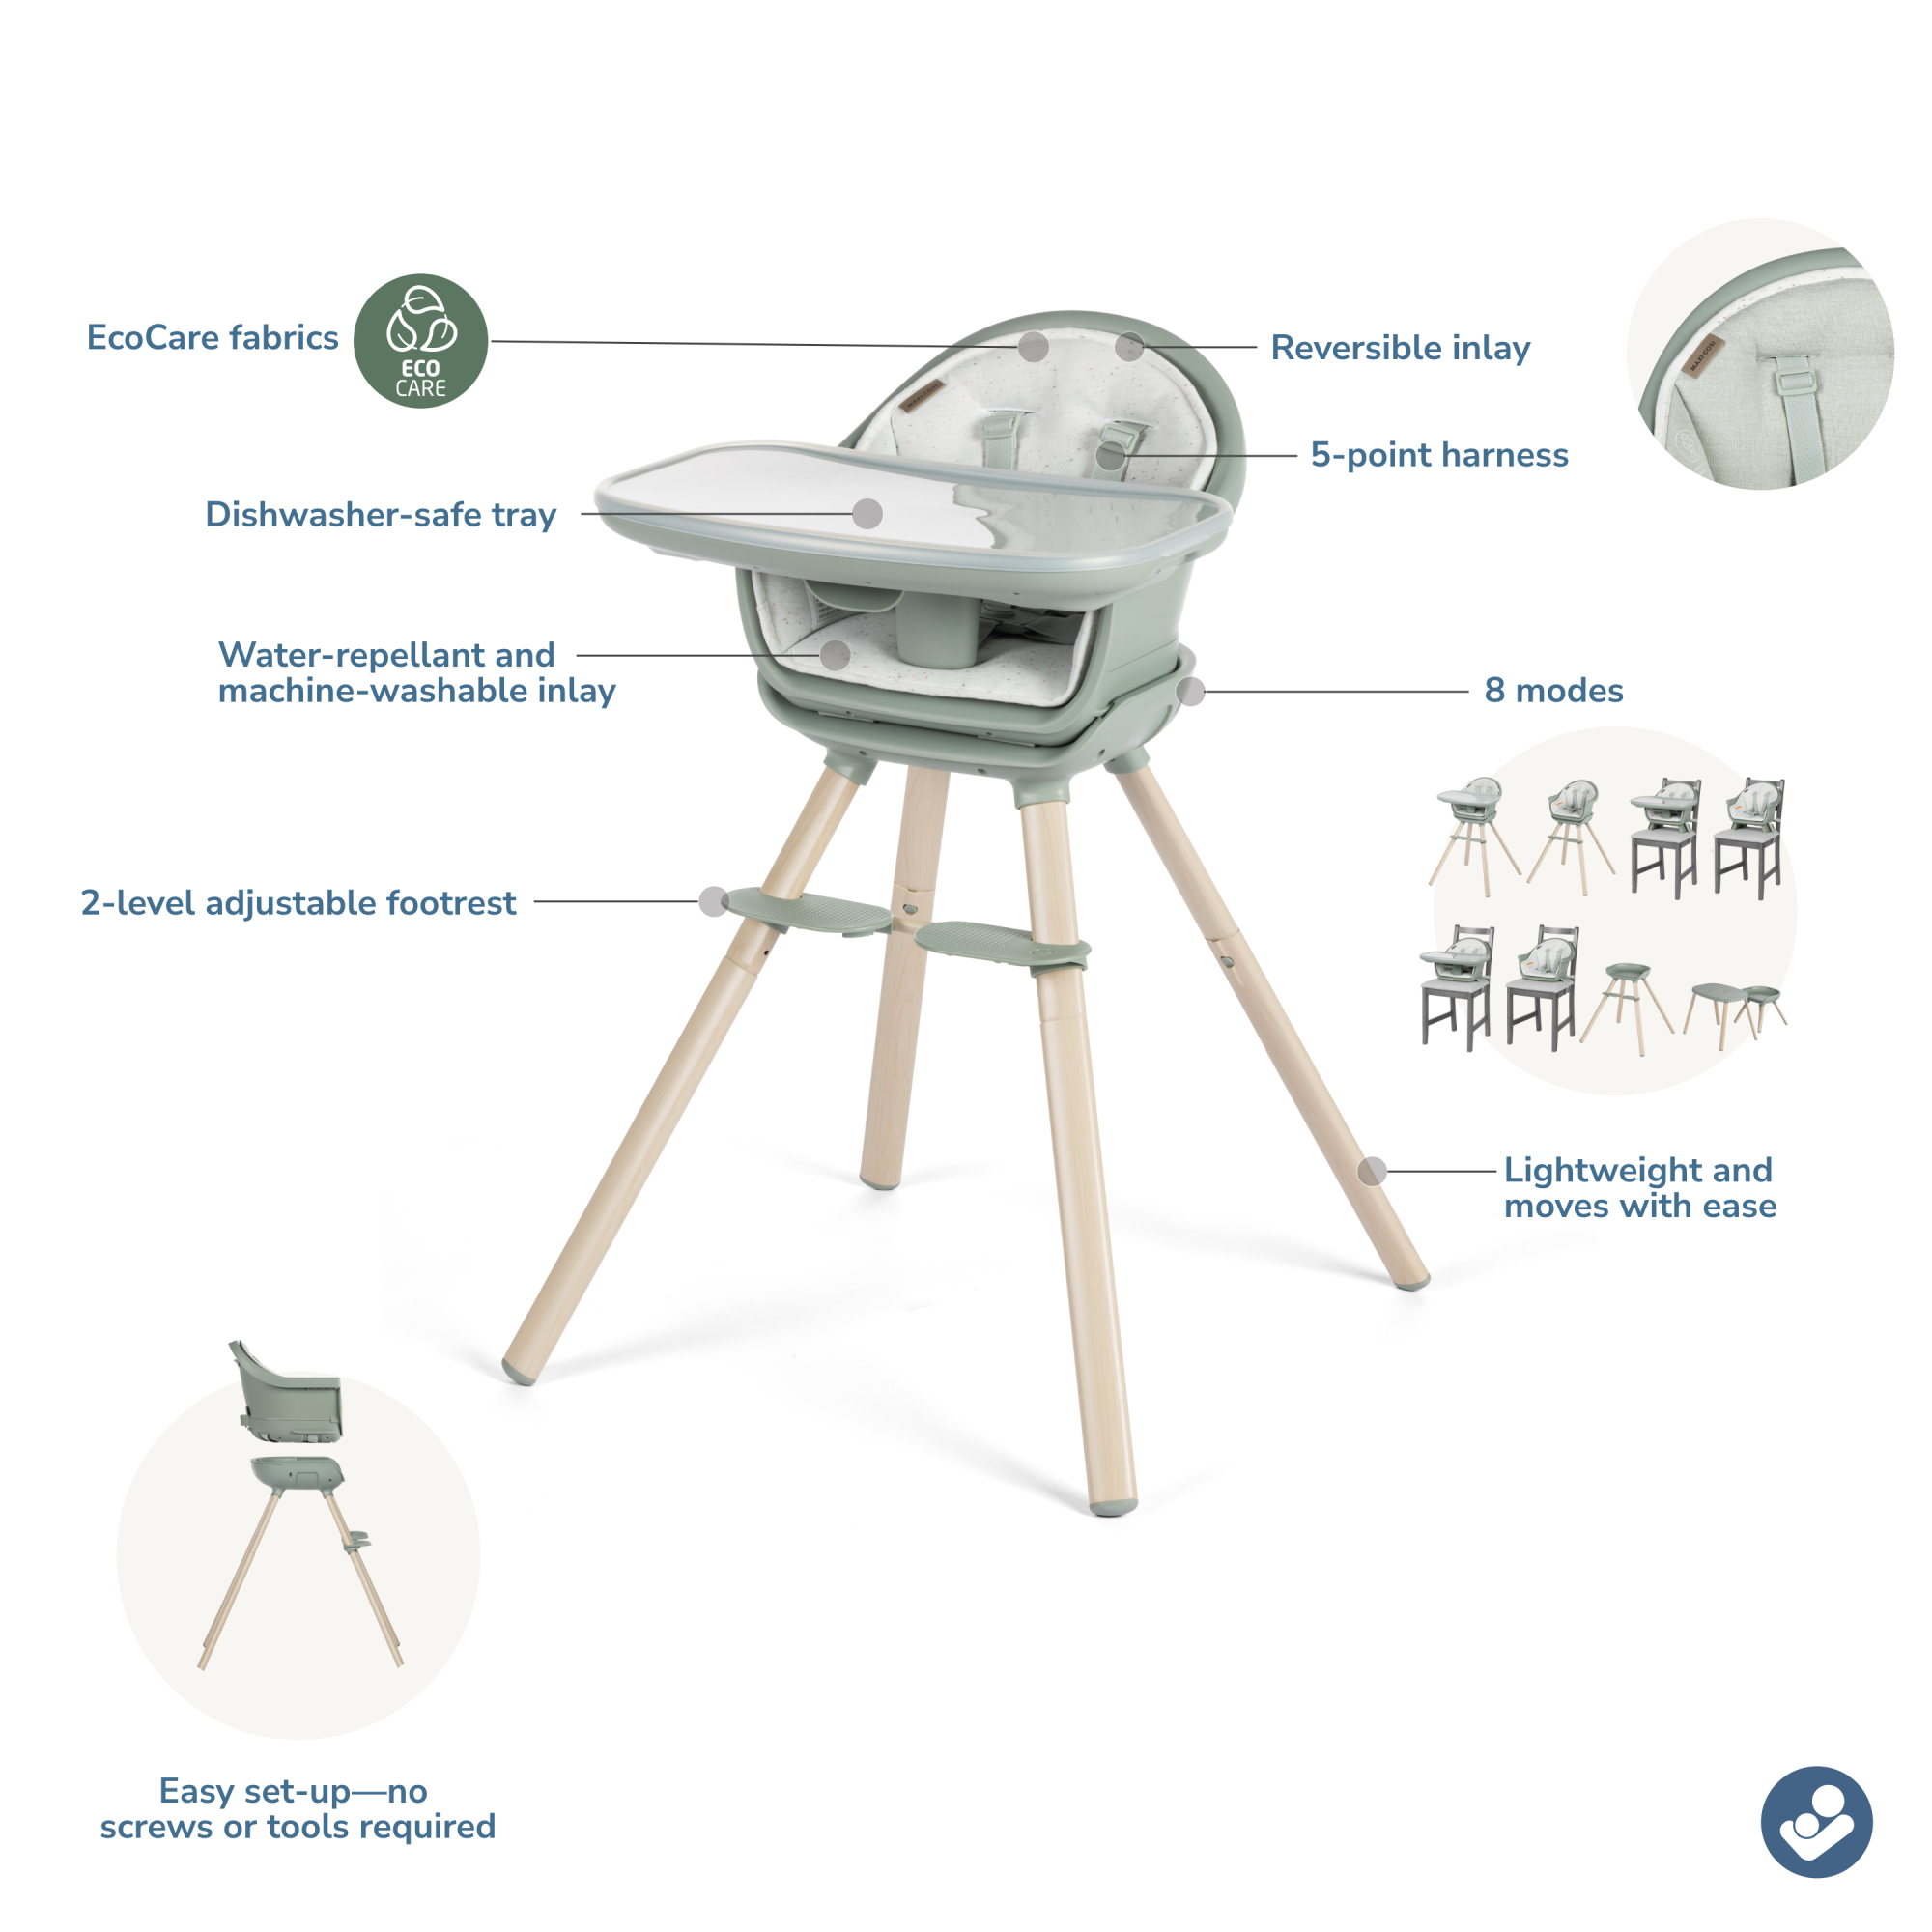 Moa 8-in-1 High Chair - Classic Green infographic: EcoCare fabrics, 5-point harness, dishwasher-safe tray, water-repellant and machine-washable inlay, 8 modes, 2-level adjustable footrest, lightweight and moves with ease, easy set-up-no screws or tools required